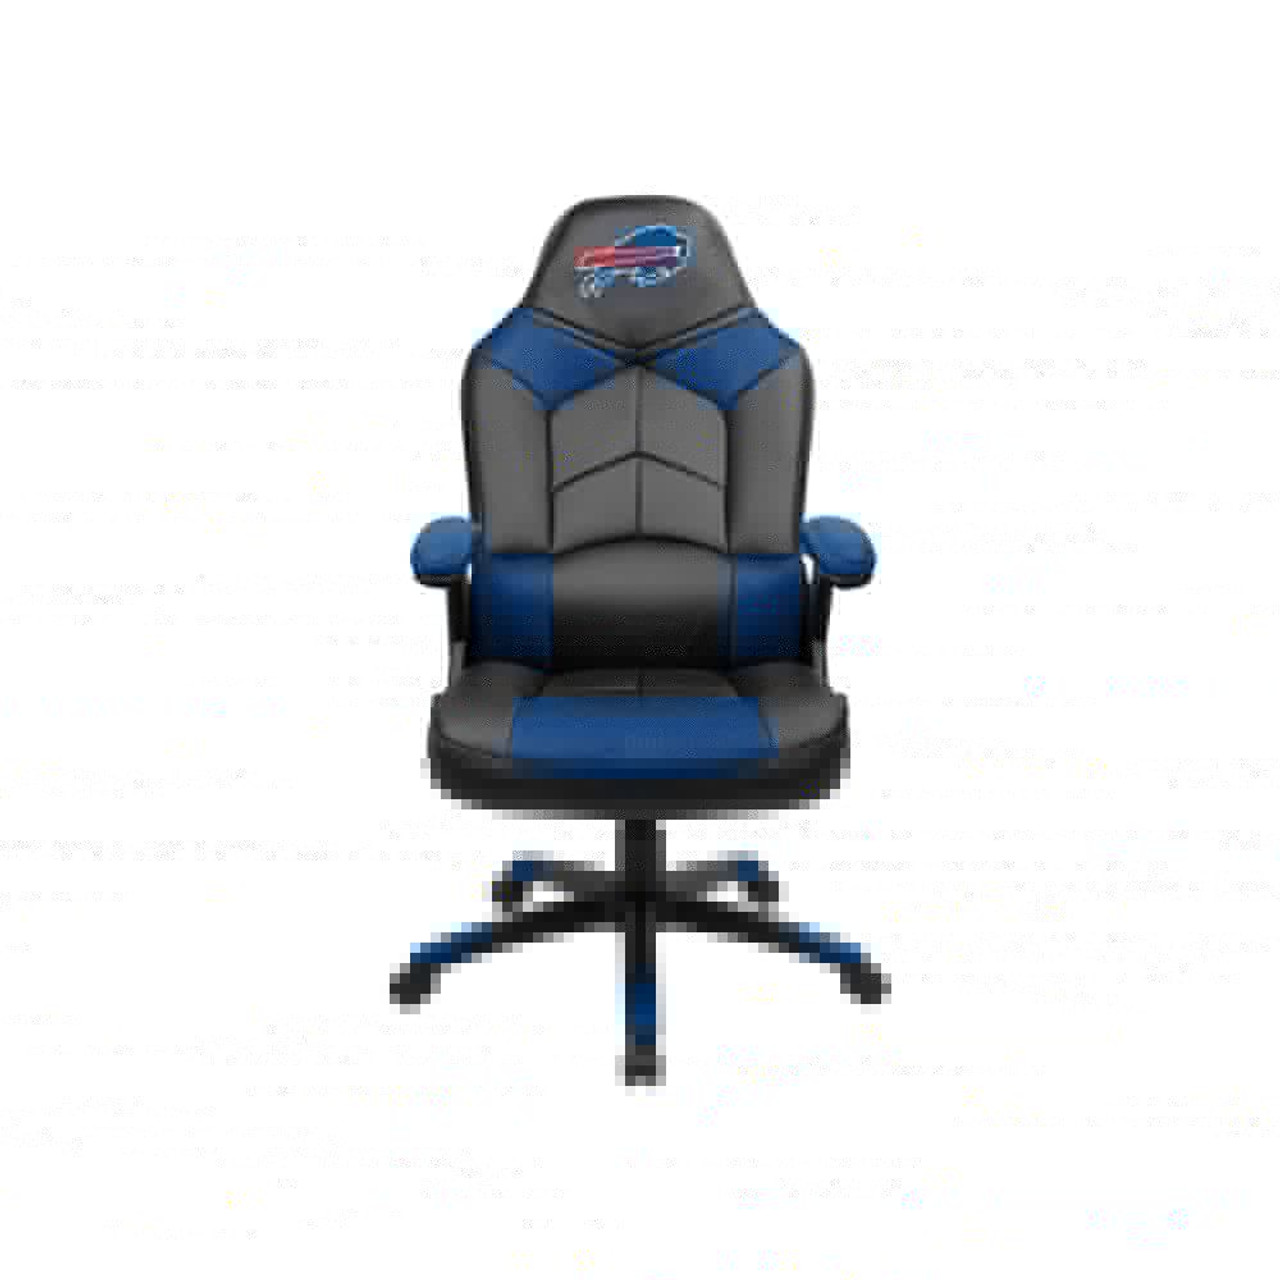 134-1021, Buffalo, Buf, BFLO, Bills, Oversized, Video, Gaming, Chair, FREE SHIPPING, NFL, Logo, Imperial